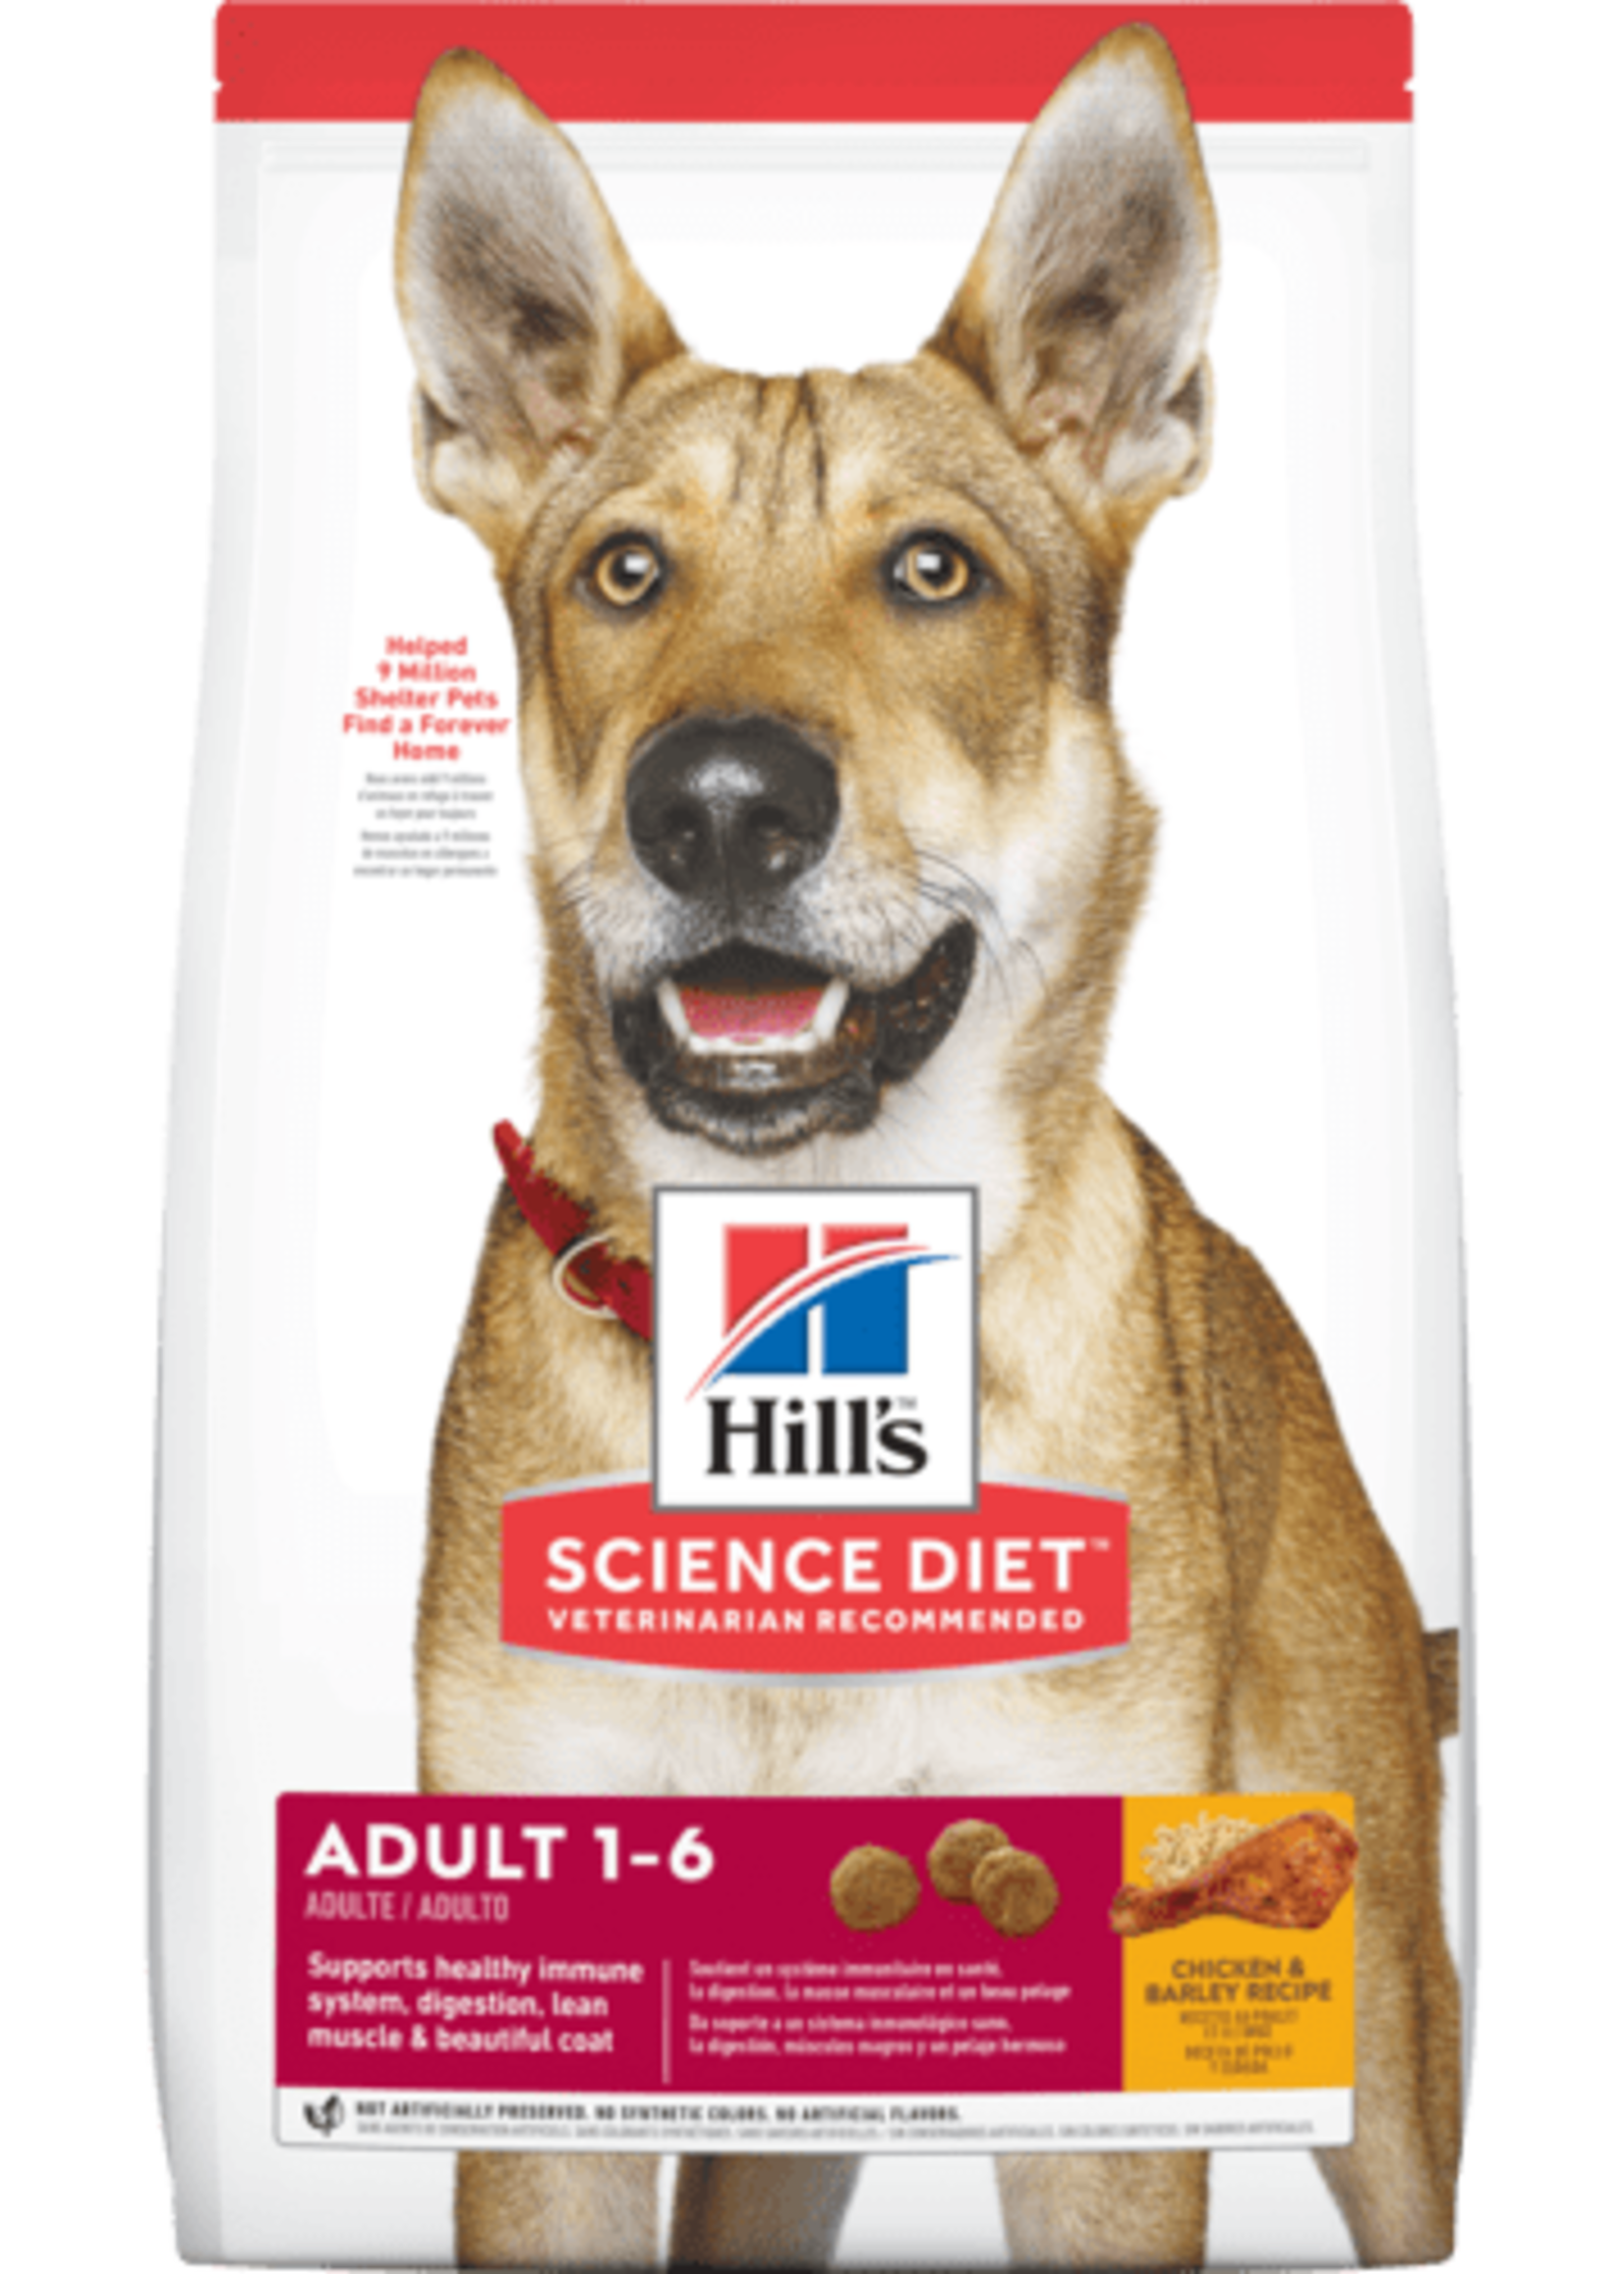 Hill's Science Diet Hill's Science Diet Canine Adult 1-6 Chicken 35lb